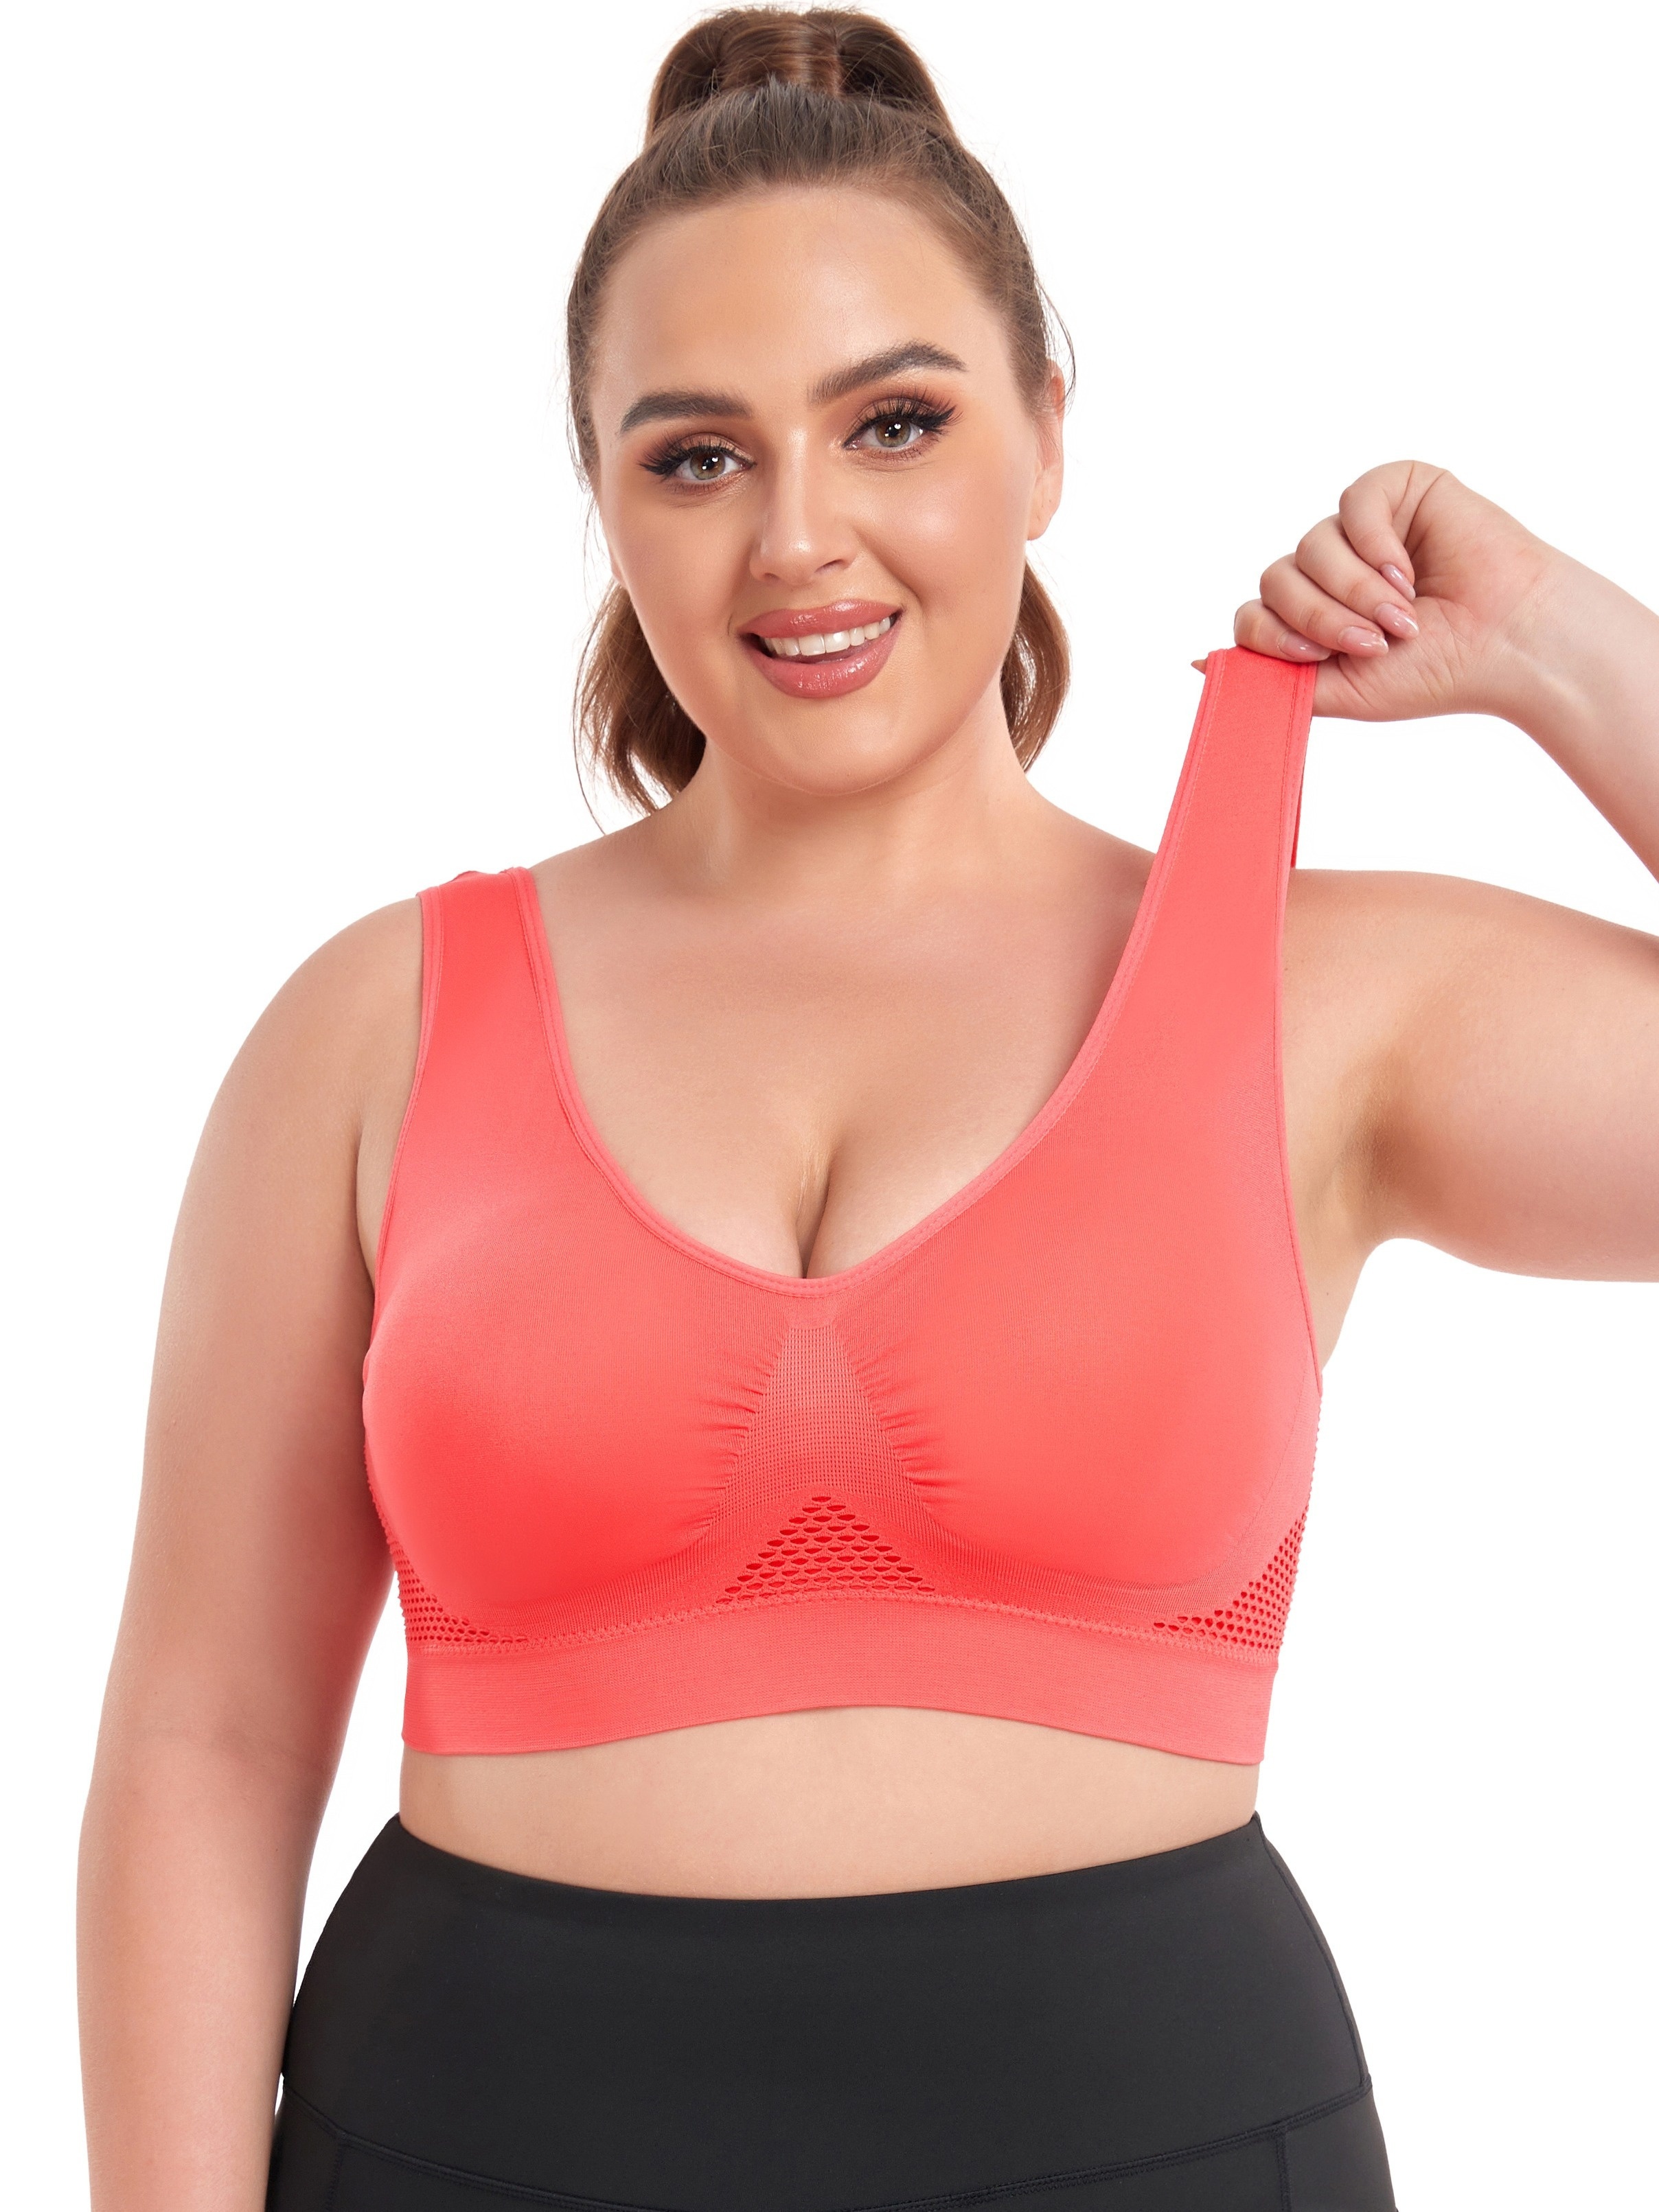 Breathable Sports Bras Women Hollow Out Padded Sports Bra Top Plus Size Gym  Running Fitness Yoga Sports Tops 